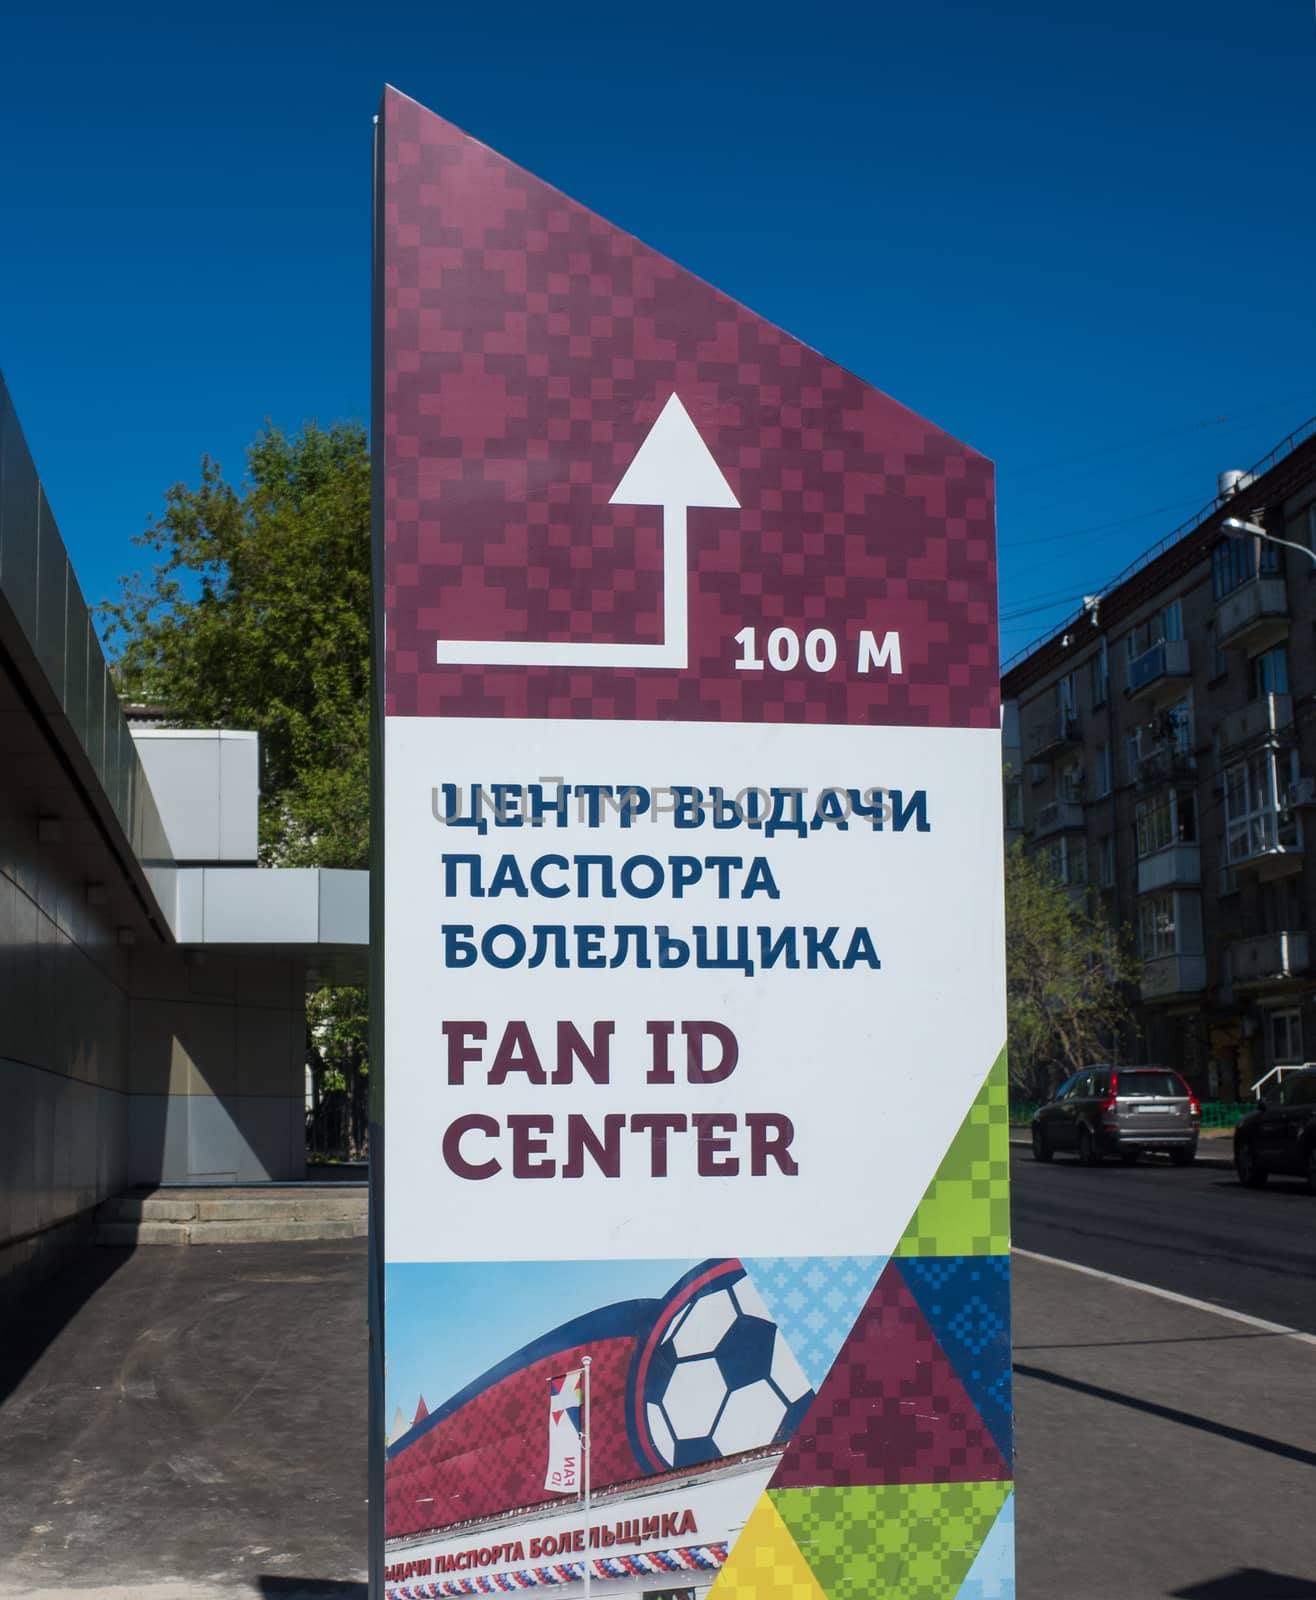 May 10, 2018 Moscow, Russia. Center for the issuance FAN ID of the FIFA World Cup 2018 in Moscow.